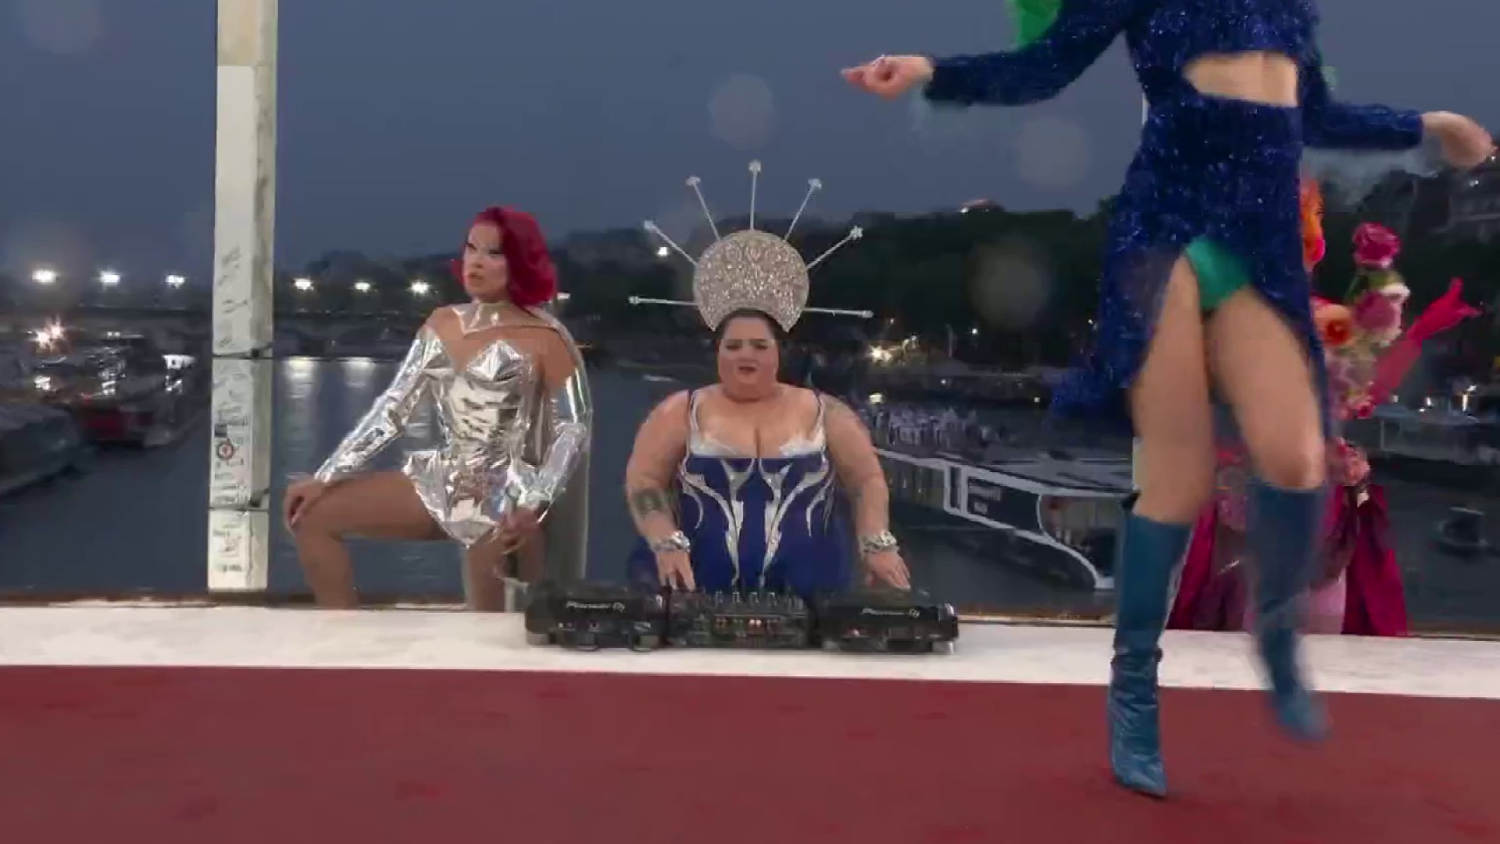 Opening Ceremony fashion vignette features drag queens 